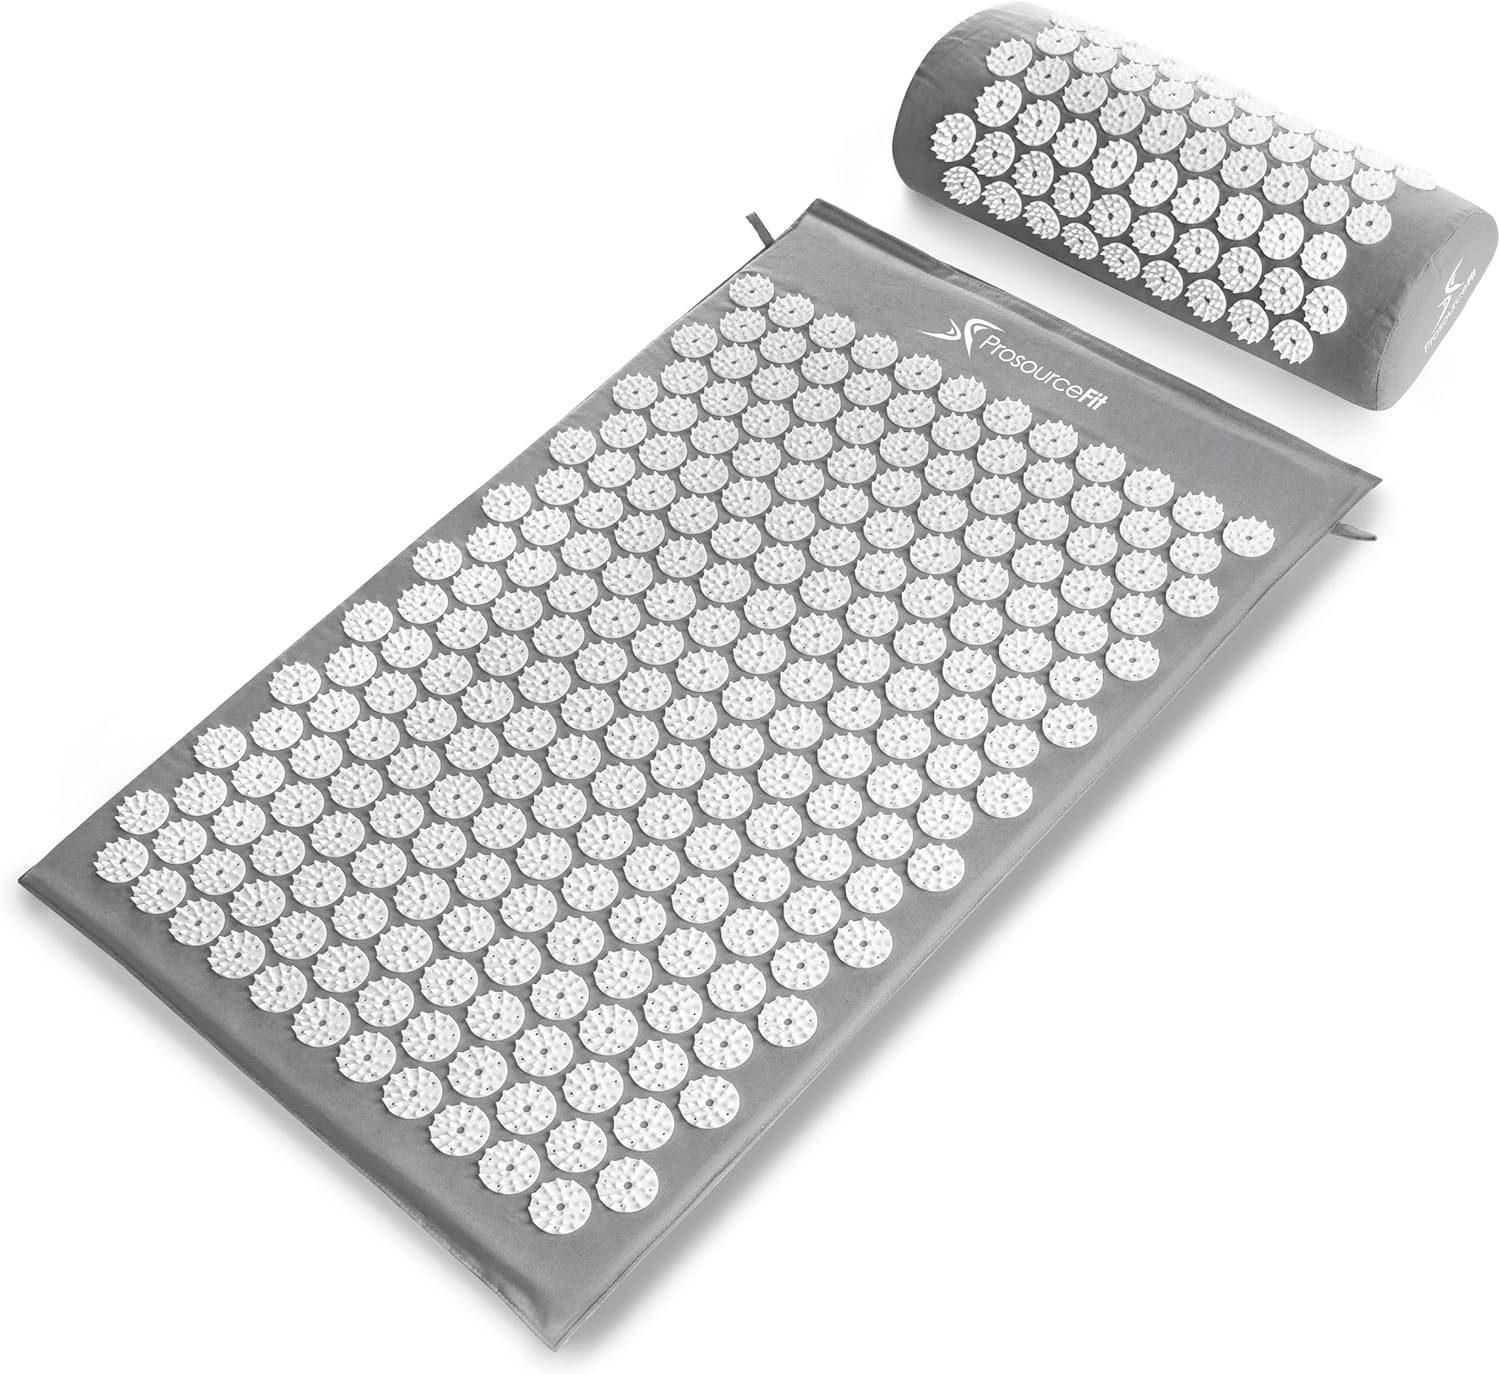 ProsourceFit Acupressure Mat and Pillow Set with 100% Natural Linen for Back/Neck Pain Relief and Muscle Relaxation